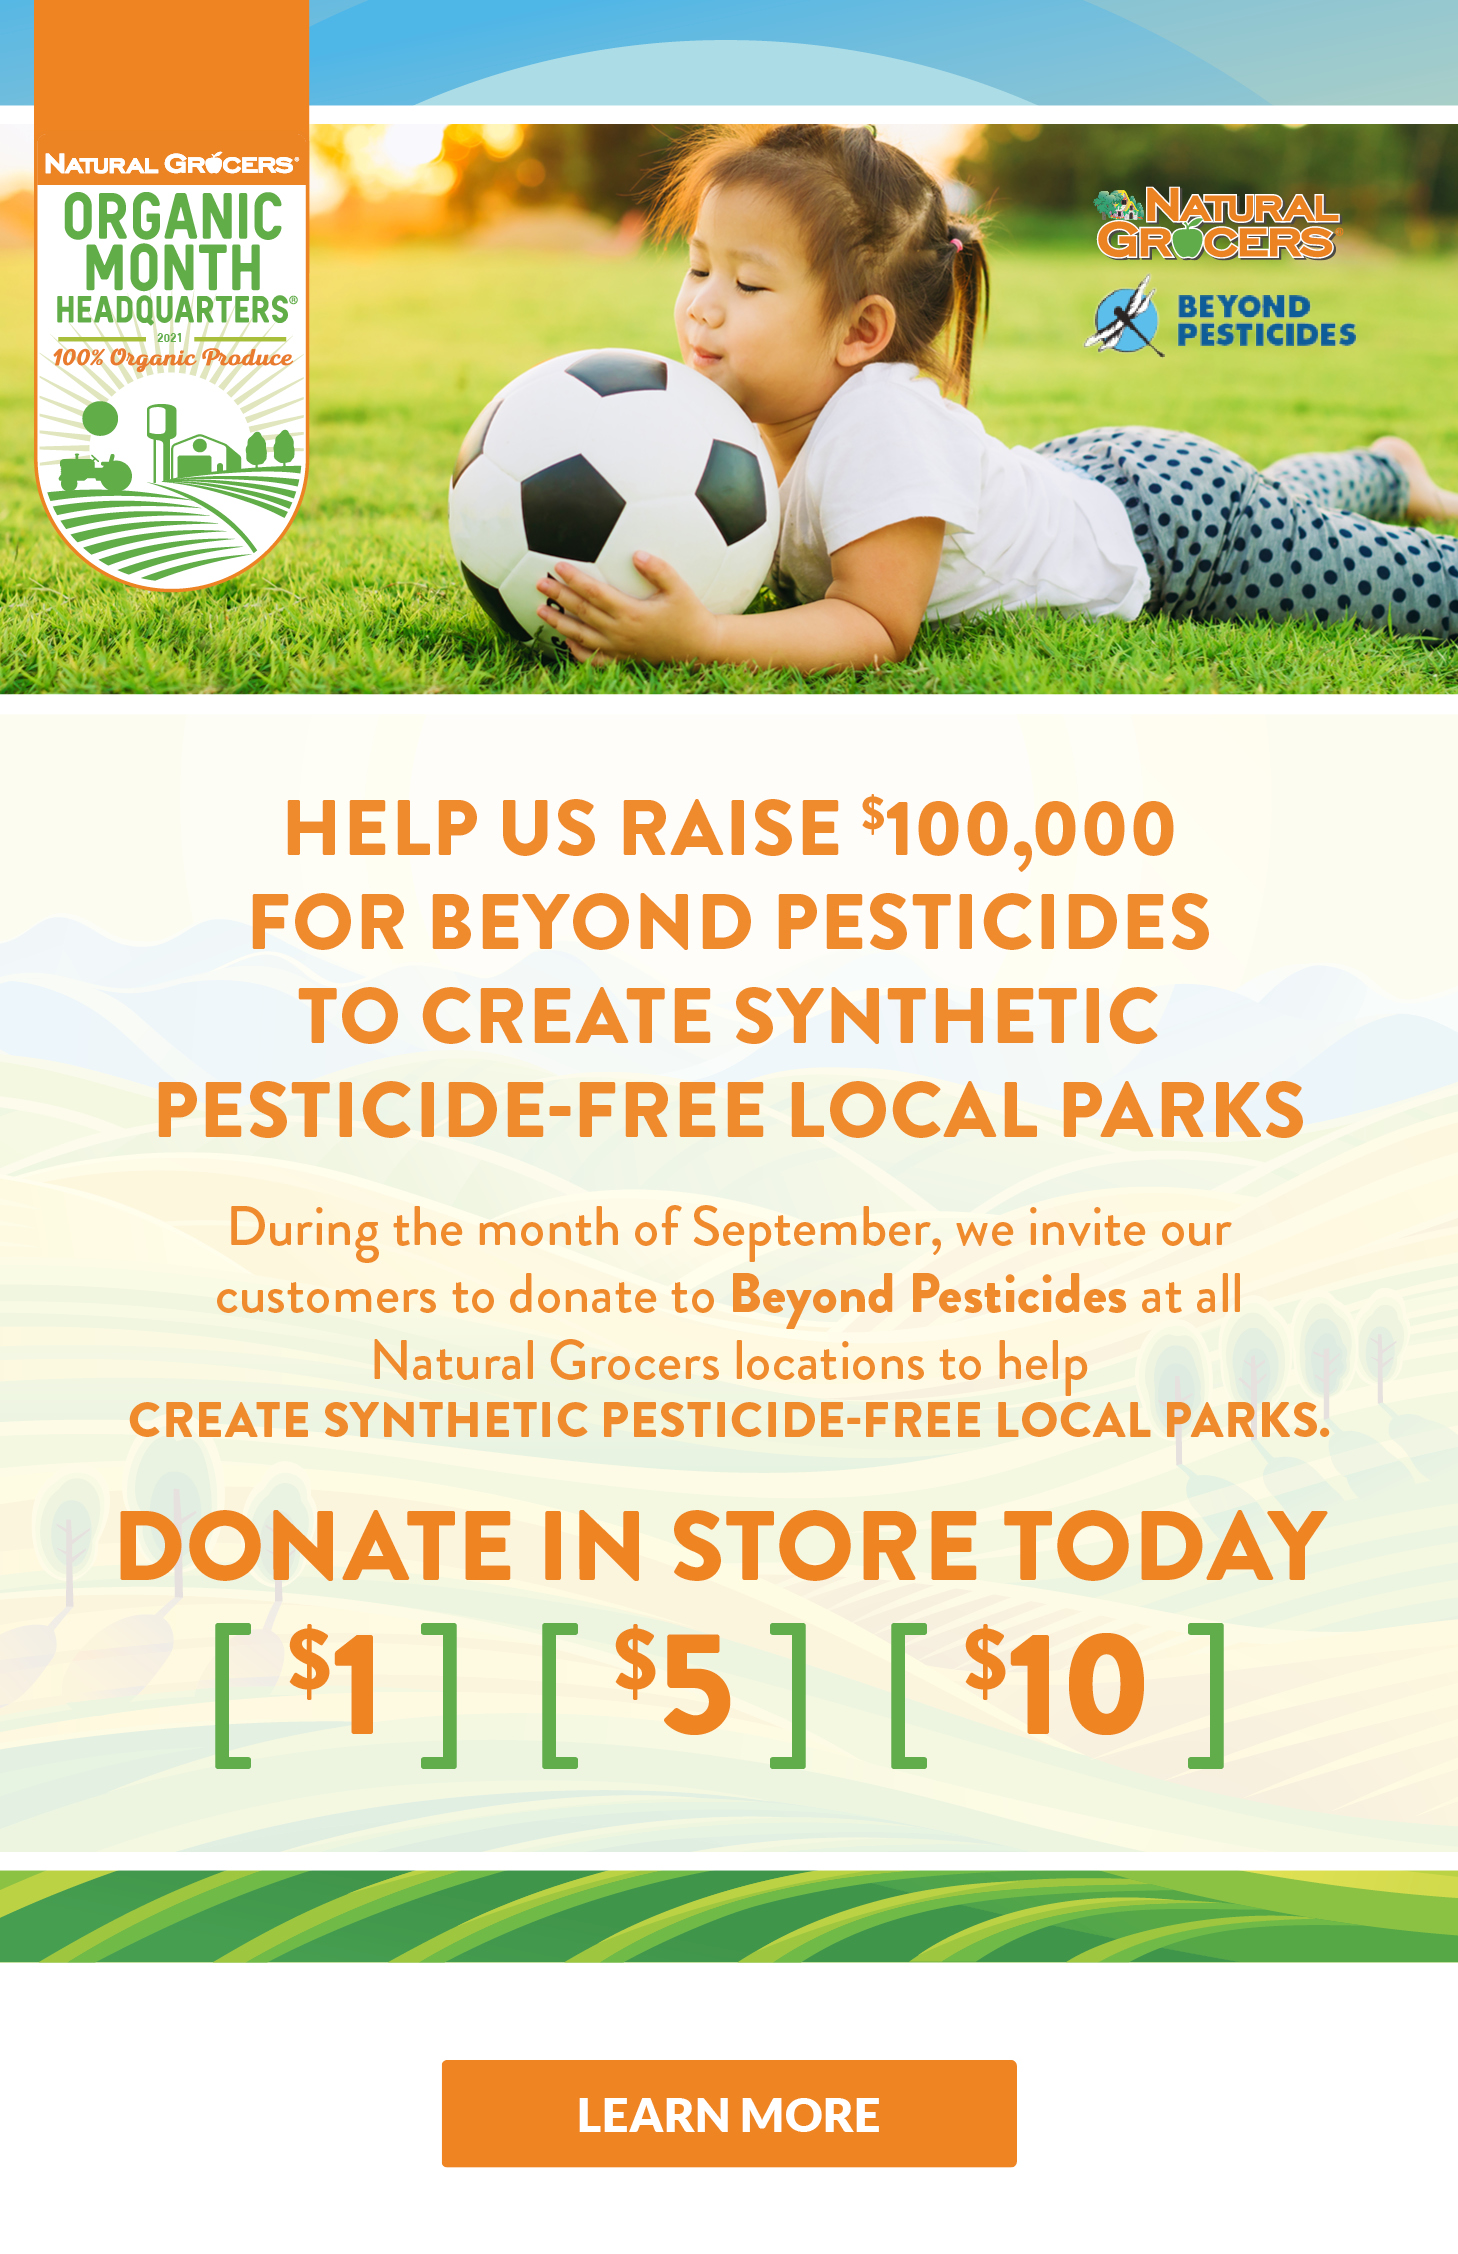 Help Create Synthetic Pesticide-Free Local Parks